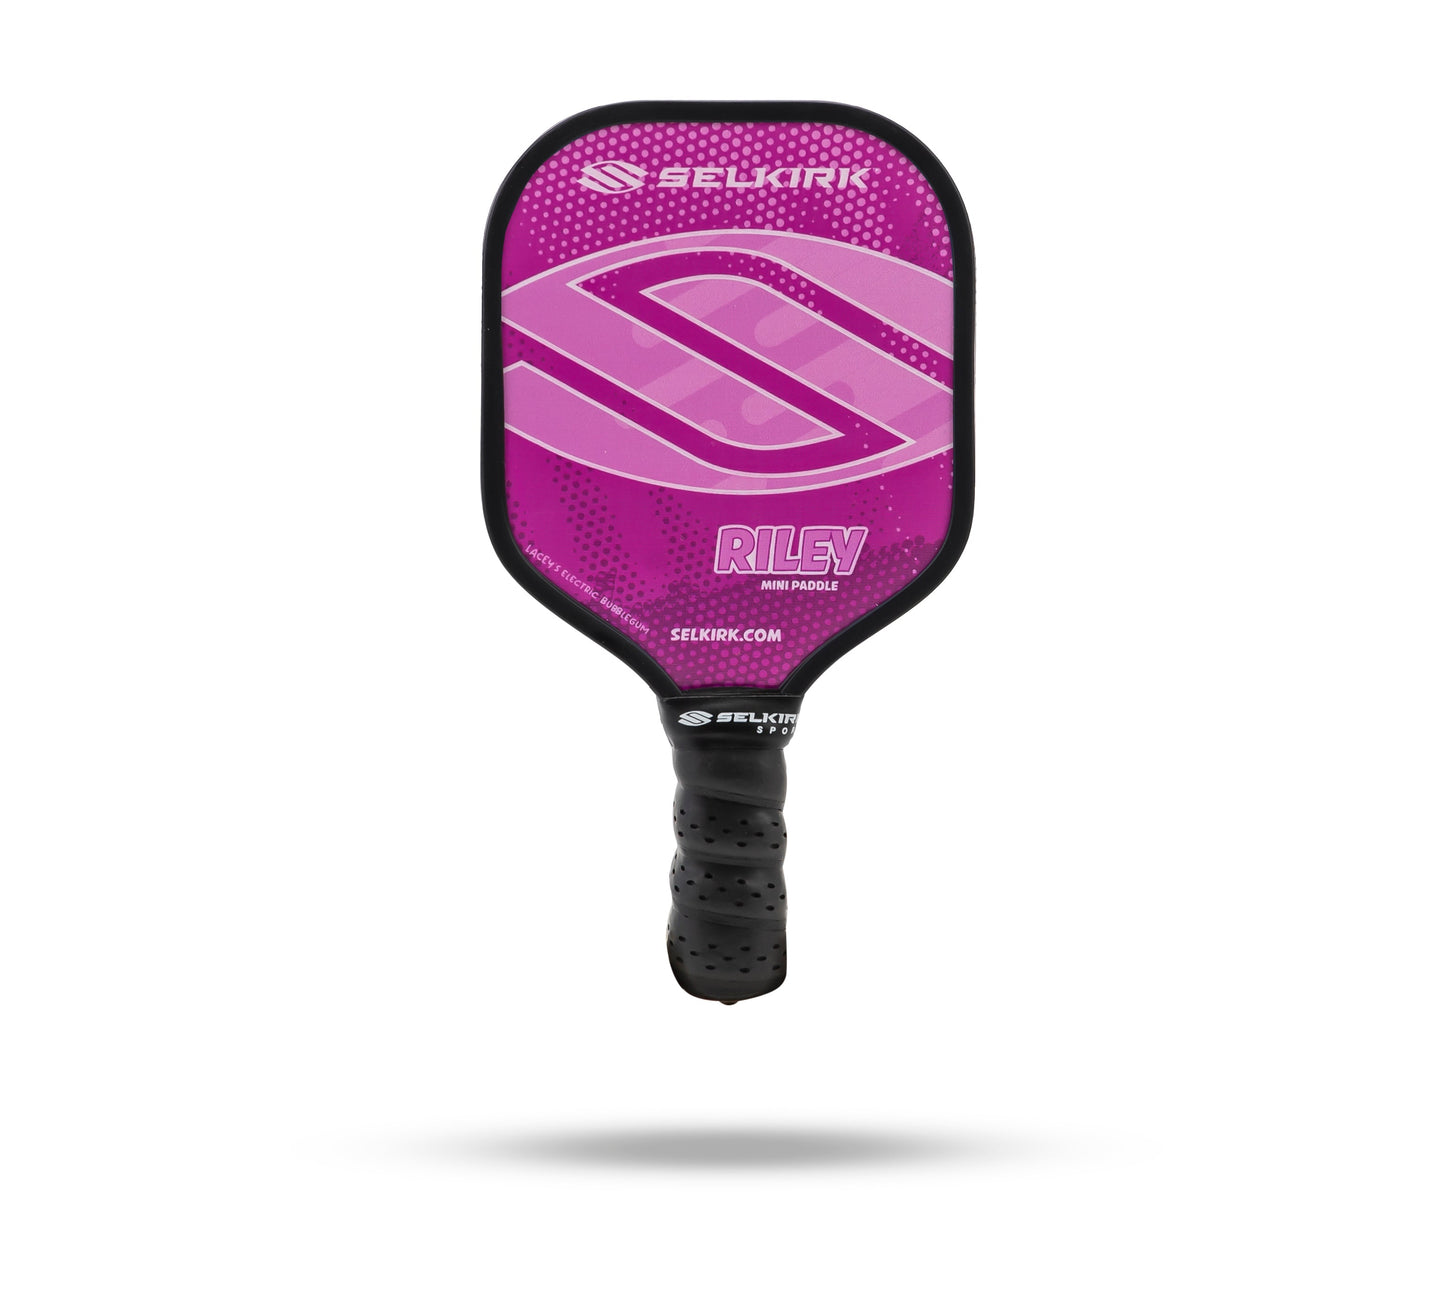 The Selkirk Riley Mini Pickleball Paddle Collection offers a fresh look with a pink paddle on a white background. Perfect as a novelty gift.